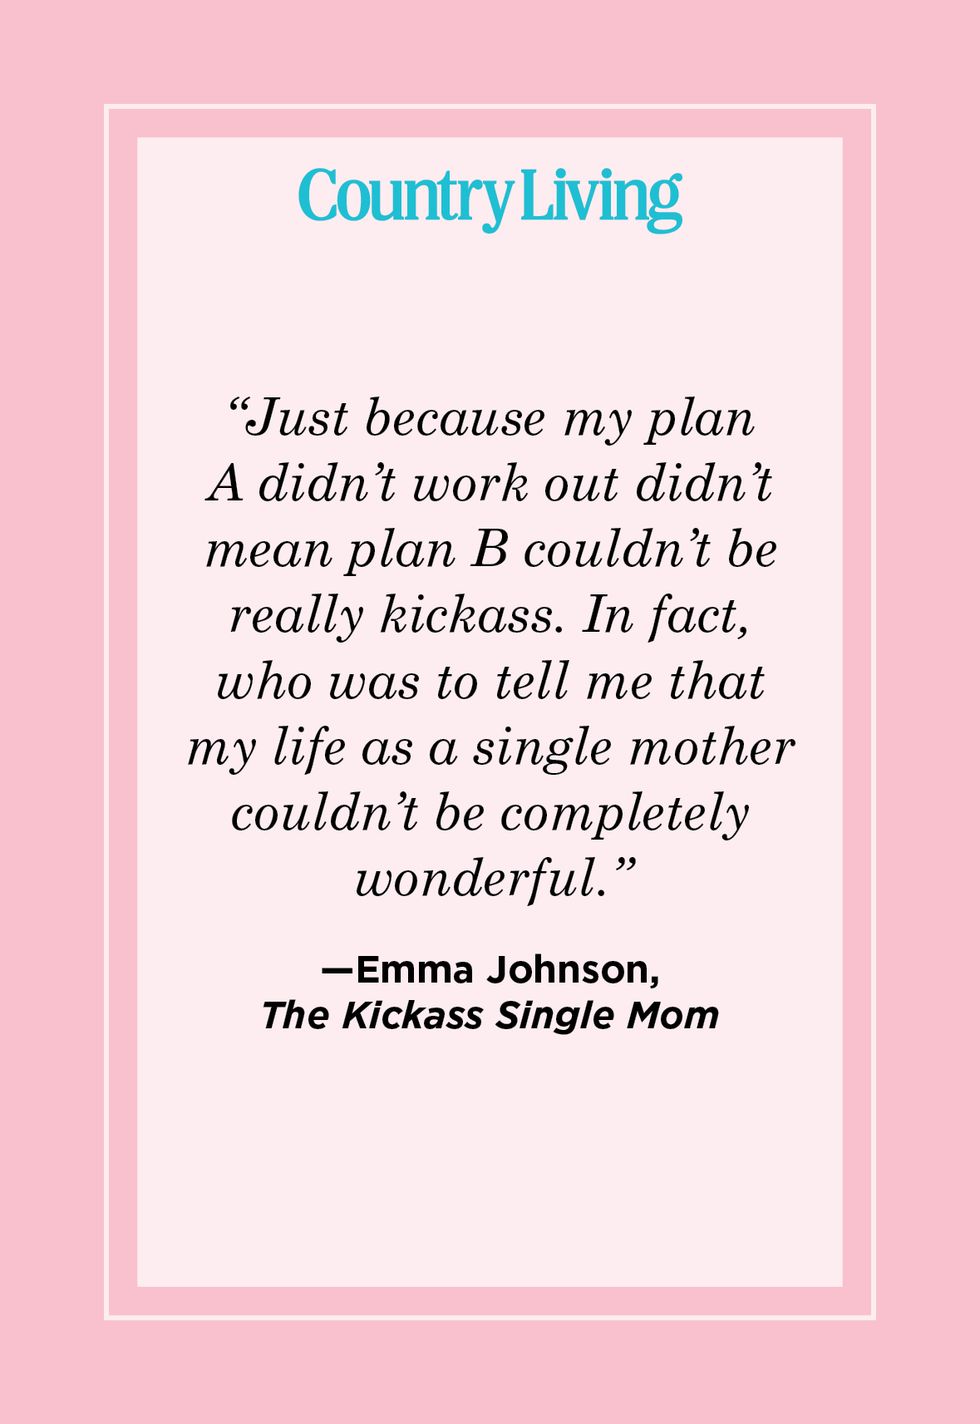 single mom quote by emma johnson